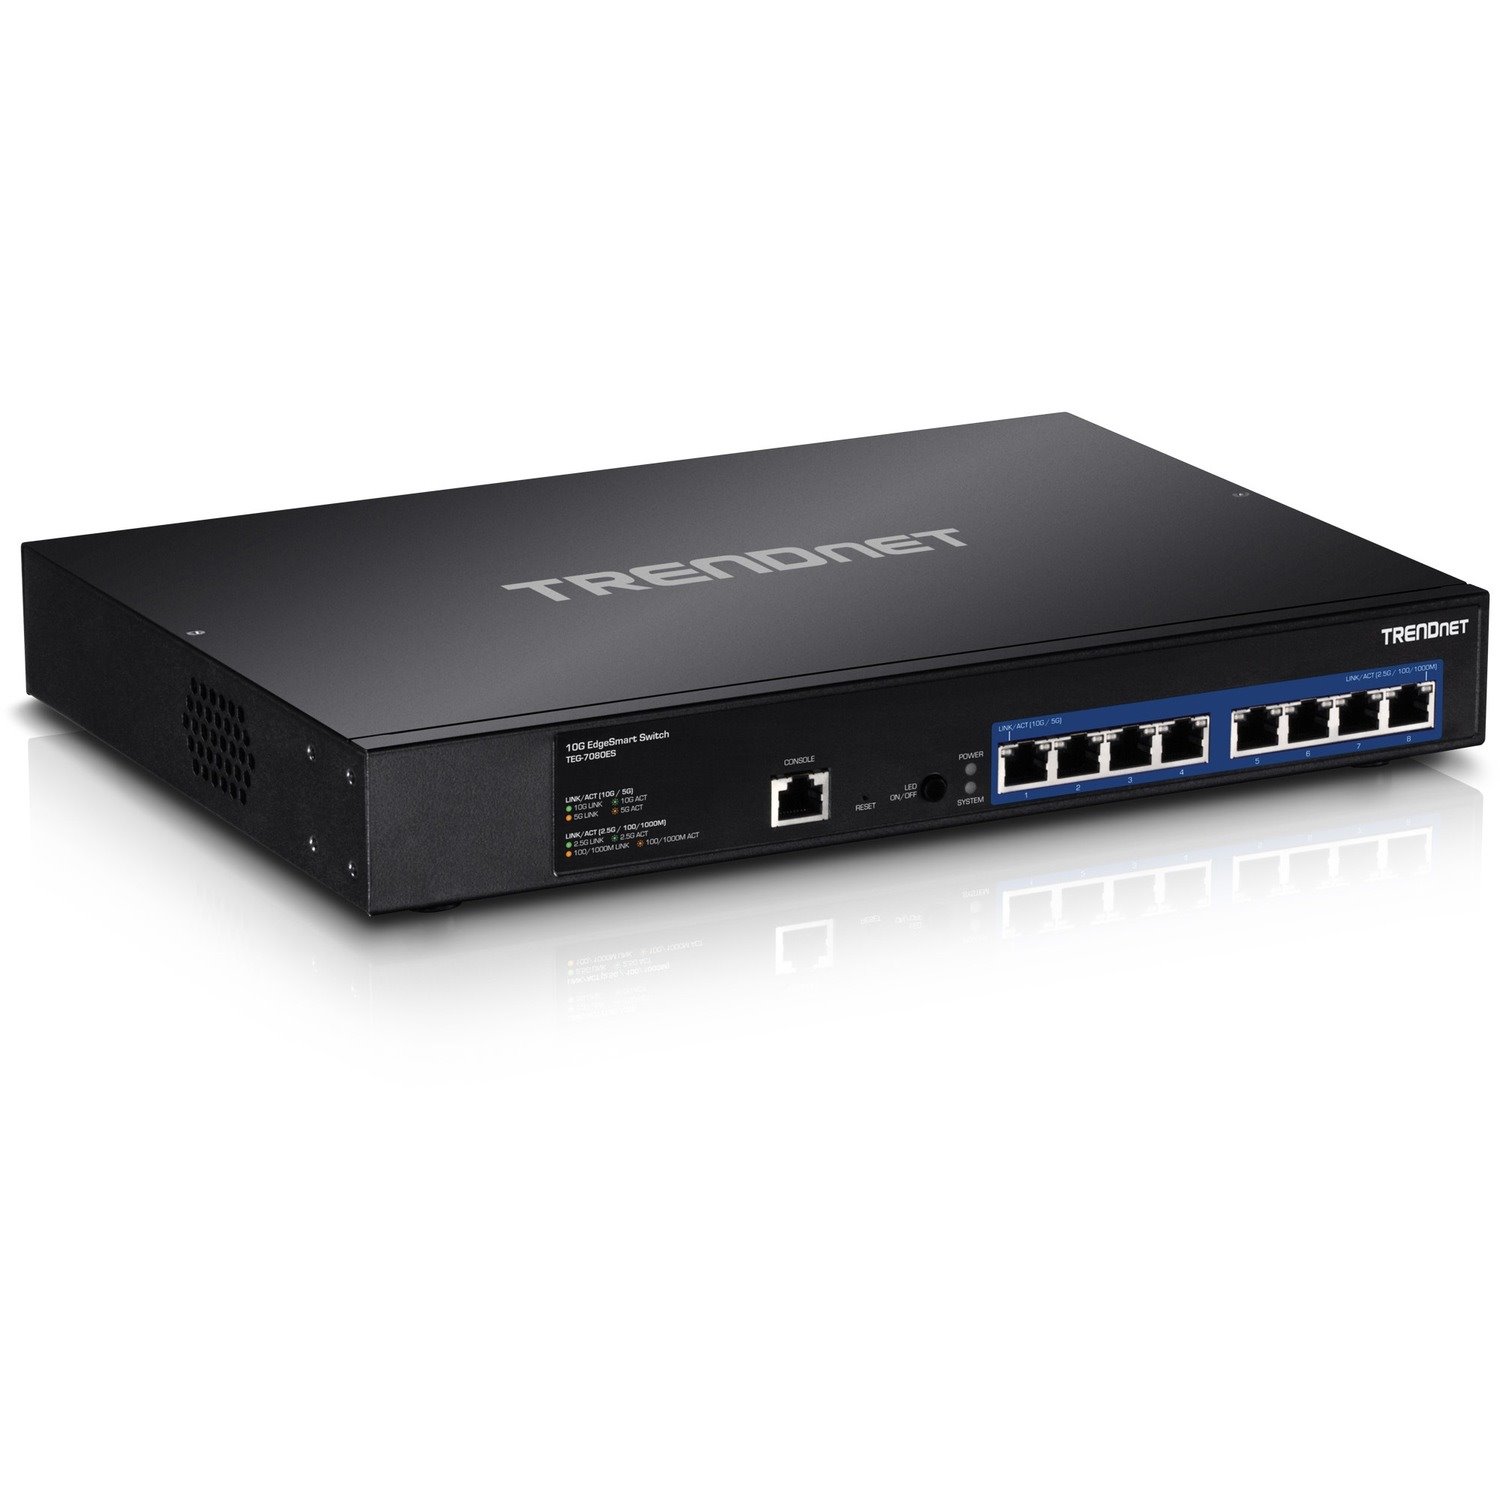 TRENDnet 8-Port 10G EdgeSmart Switch, 8 x 10GBASE-T Ports, Supports 2.5G-5G NBASE-T, 160Gbps Switch Capacity, 1U Rack Mountable, 10G Managed Network Switch, Lifetime Protection, Black, TEG-7080ES